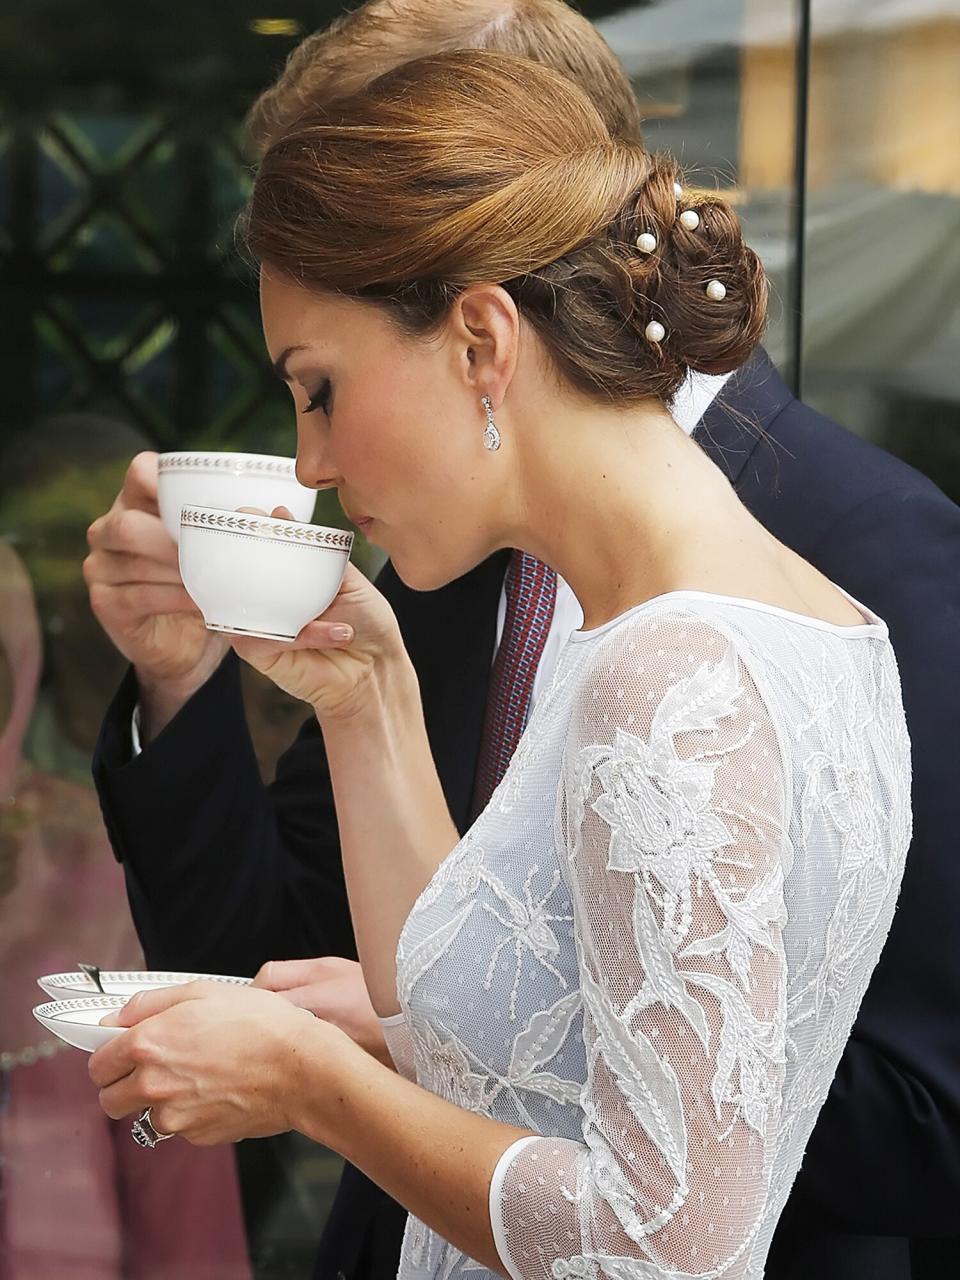 Catherine, Duchess of Cambridge drinks tea at the British High Commission on day 4 of Prince William, Duke of Cambridge and Catherine, Duchess of Cambridge's Diamond Jubilee Tour of the Far East on September 14, 2012 in Kuala Lumpur, Malaysia